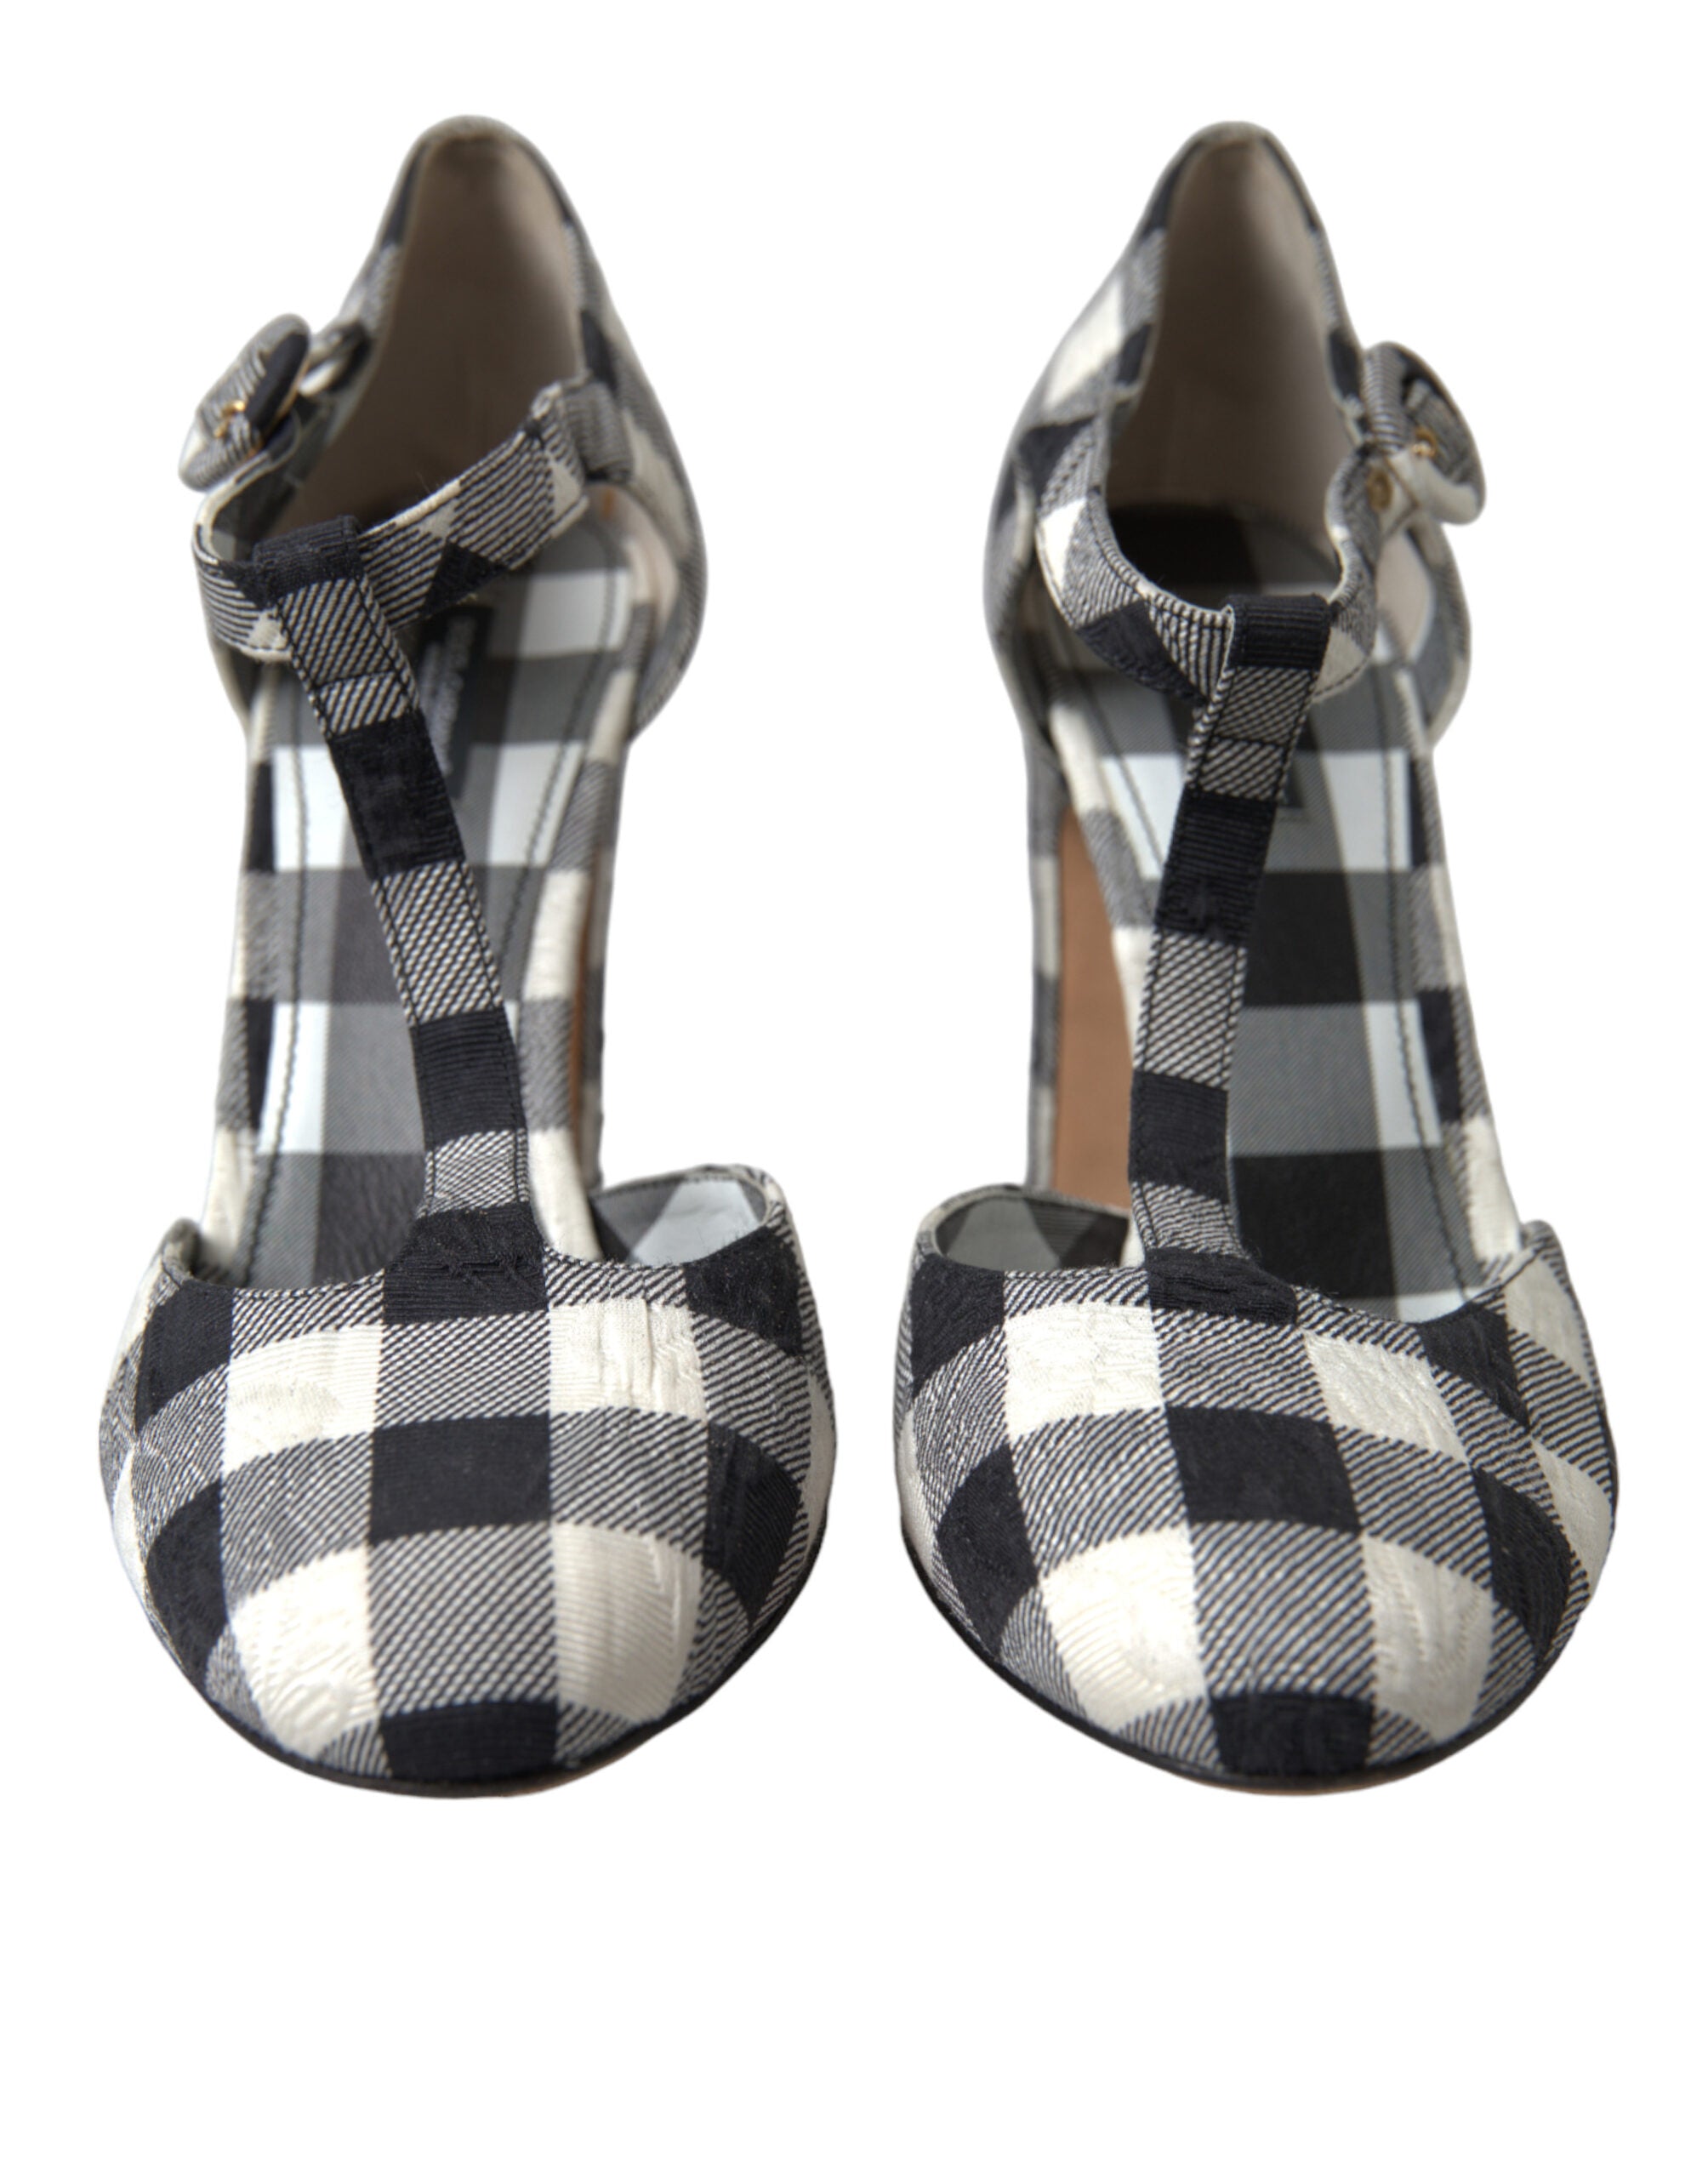 Chic Gingham T-Strap Pumps: Timeless Mary Jane Heels